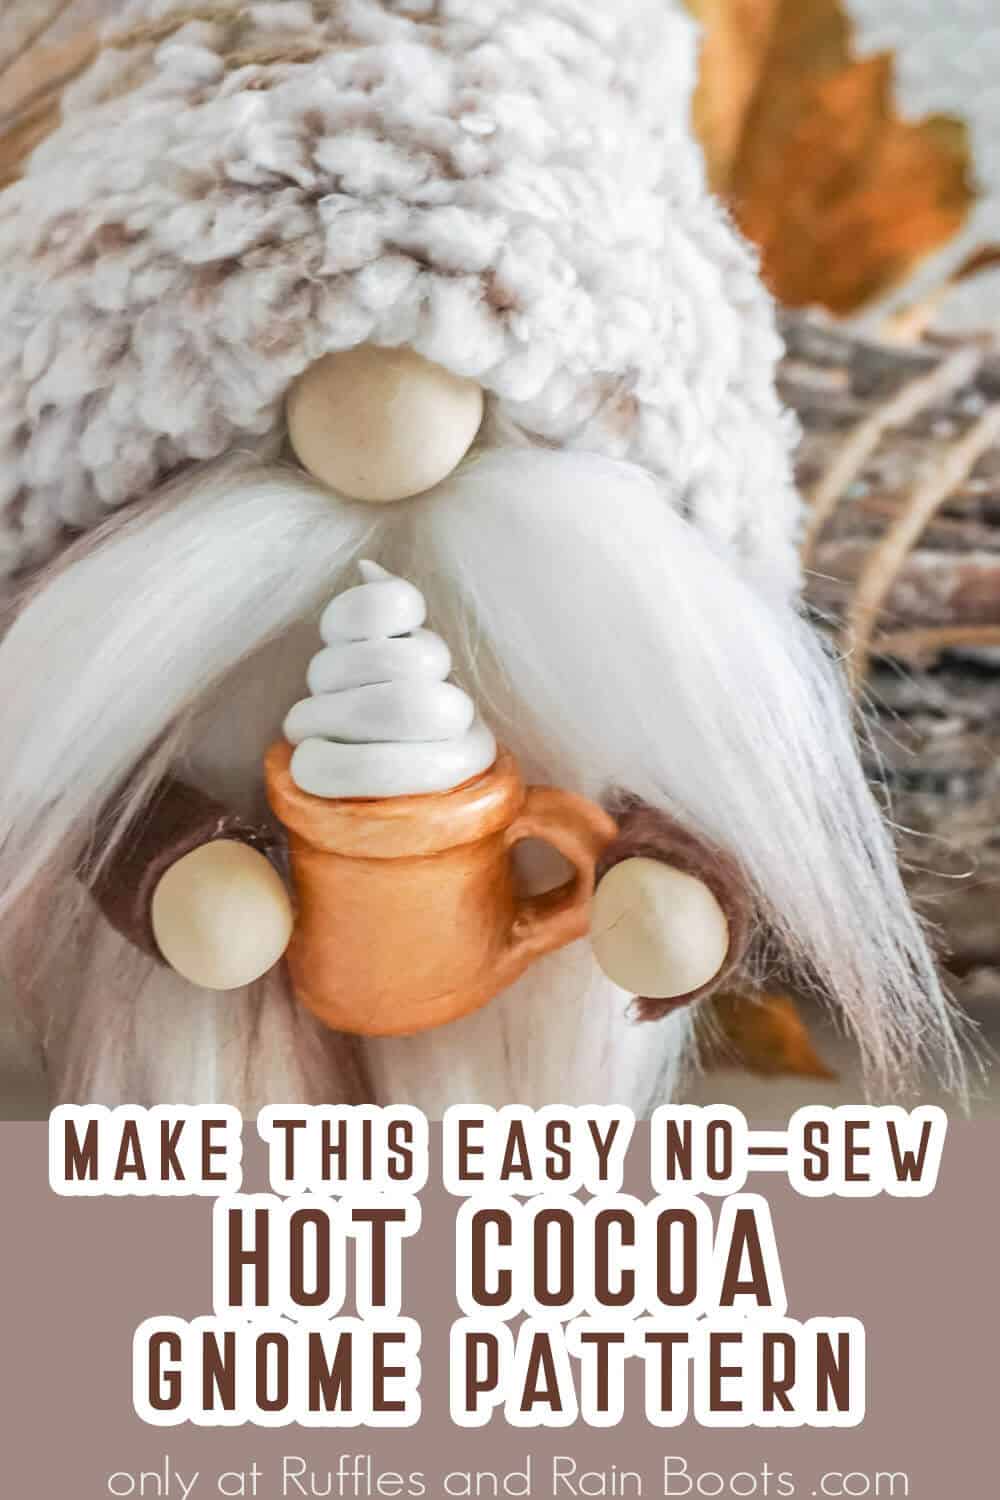 No-sew gnome pattern with a hot cocoa mug with text which reads make this easy no-sew hot cocoa gnome pattern.